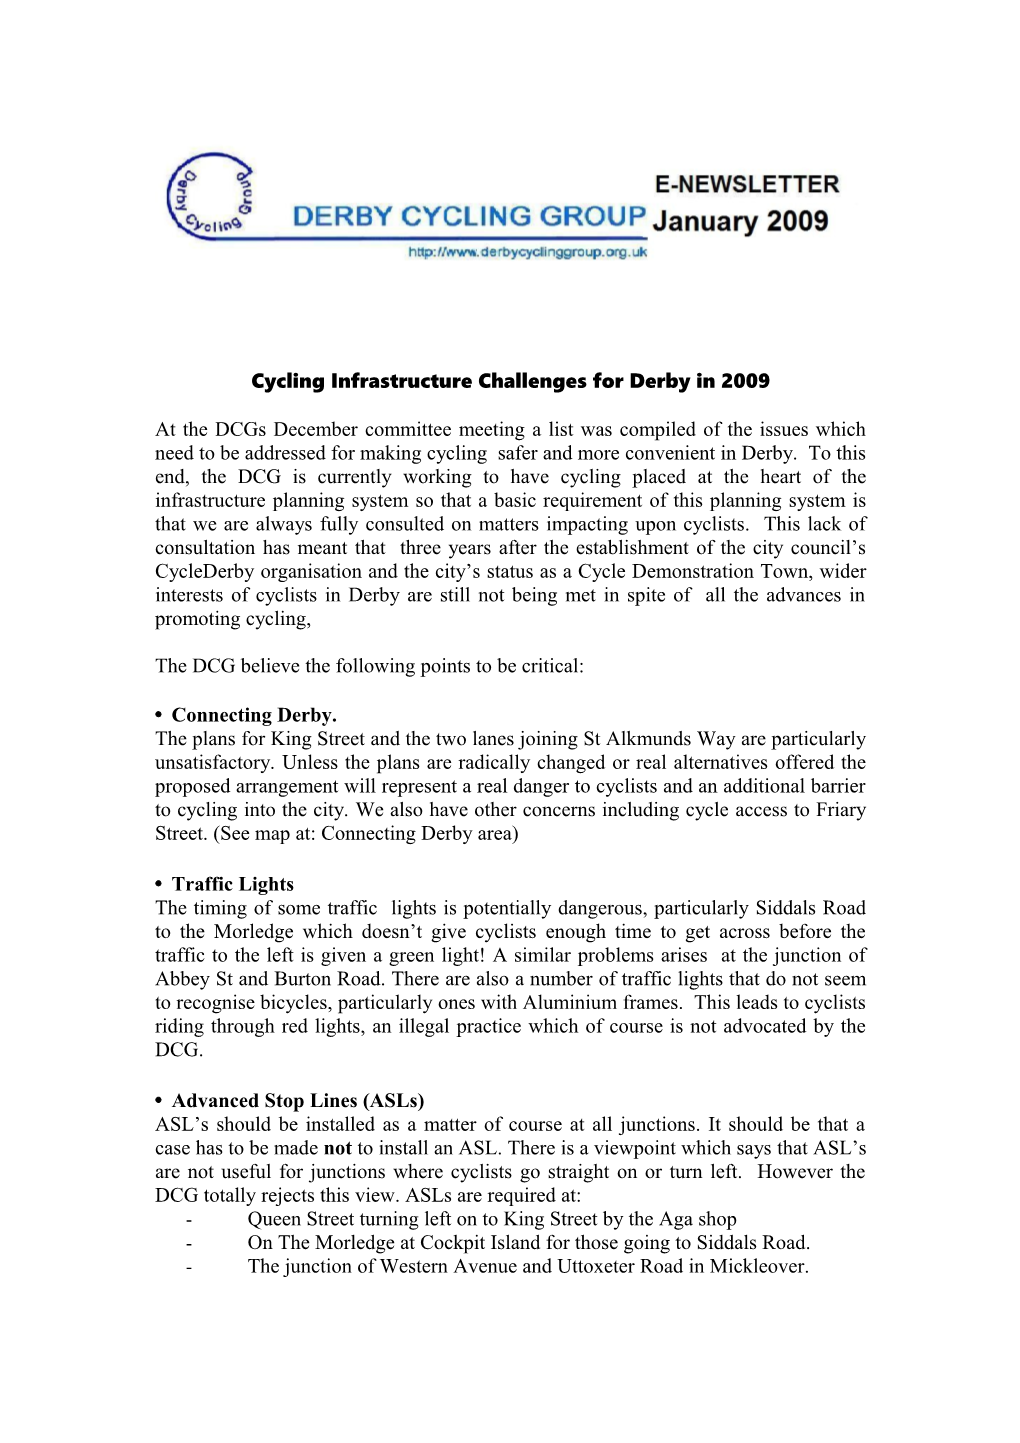 Cycling Infrastructure Challenges for Derby in 2009